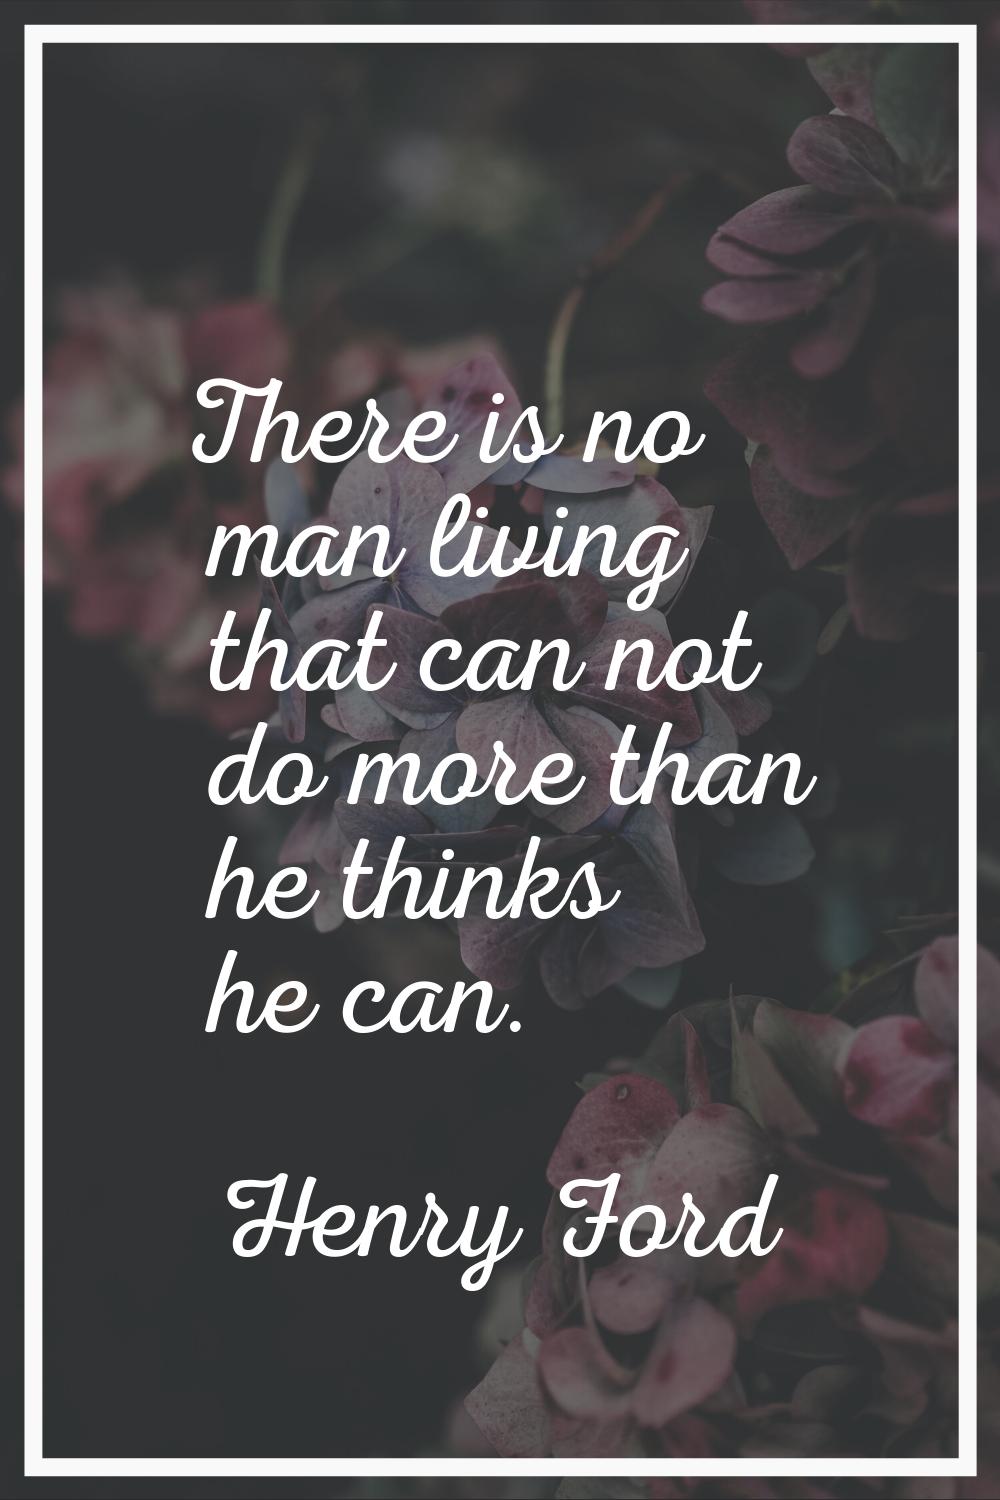 There is no man living that can not do more than he thinks he can.